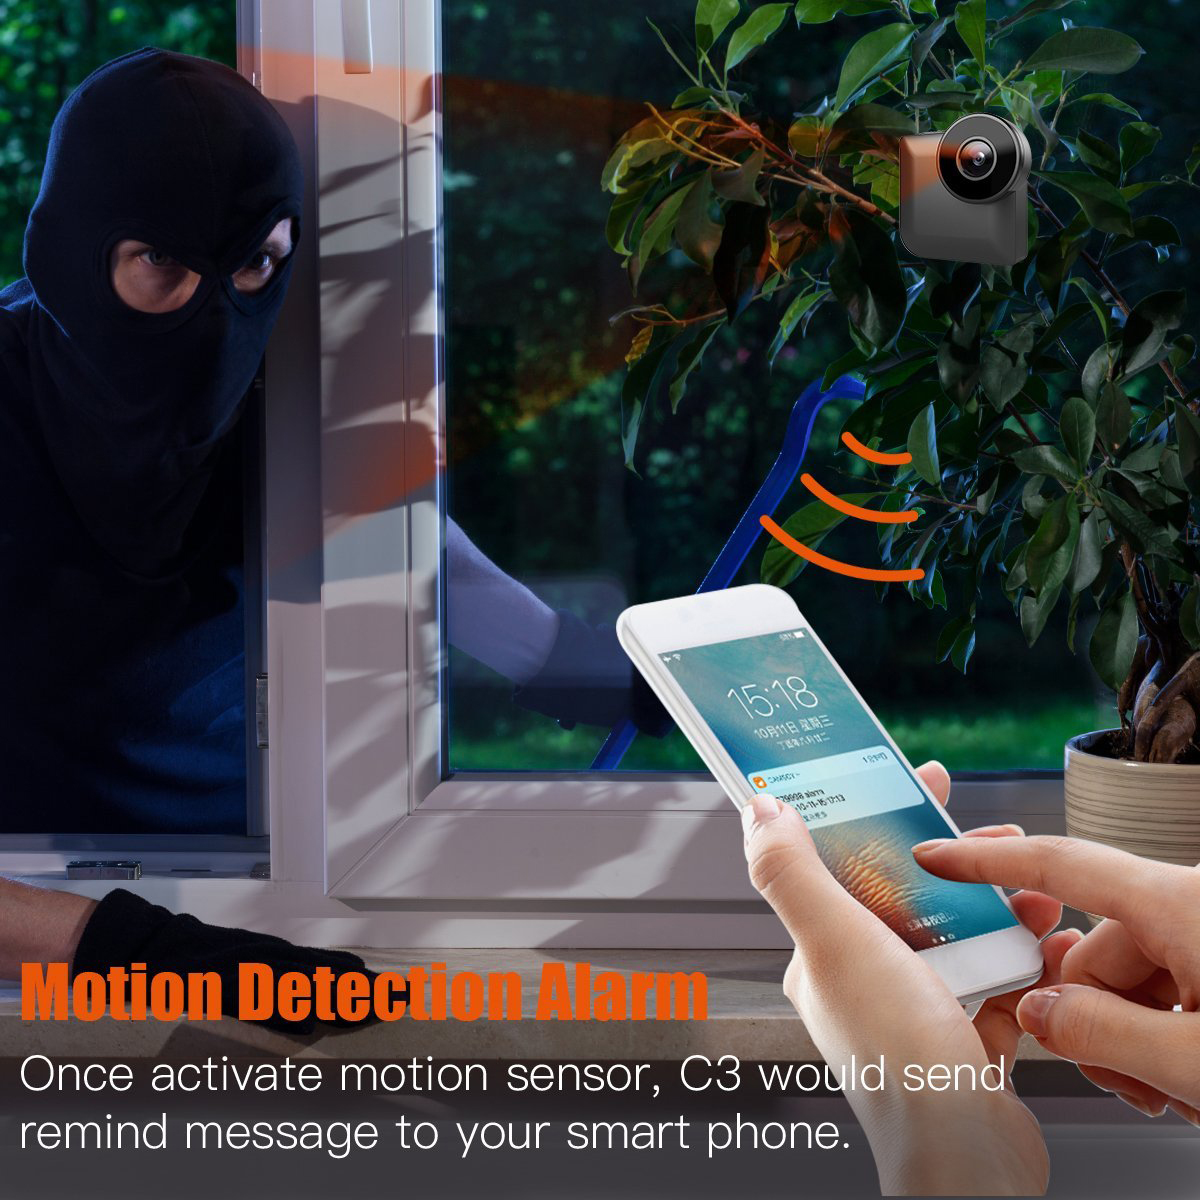 WiFi 140° Wide-angle 720P Camera Motion Detection Remote Intelligent Infrared IP Wireless HD Camera 72